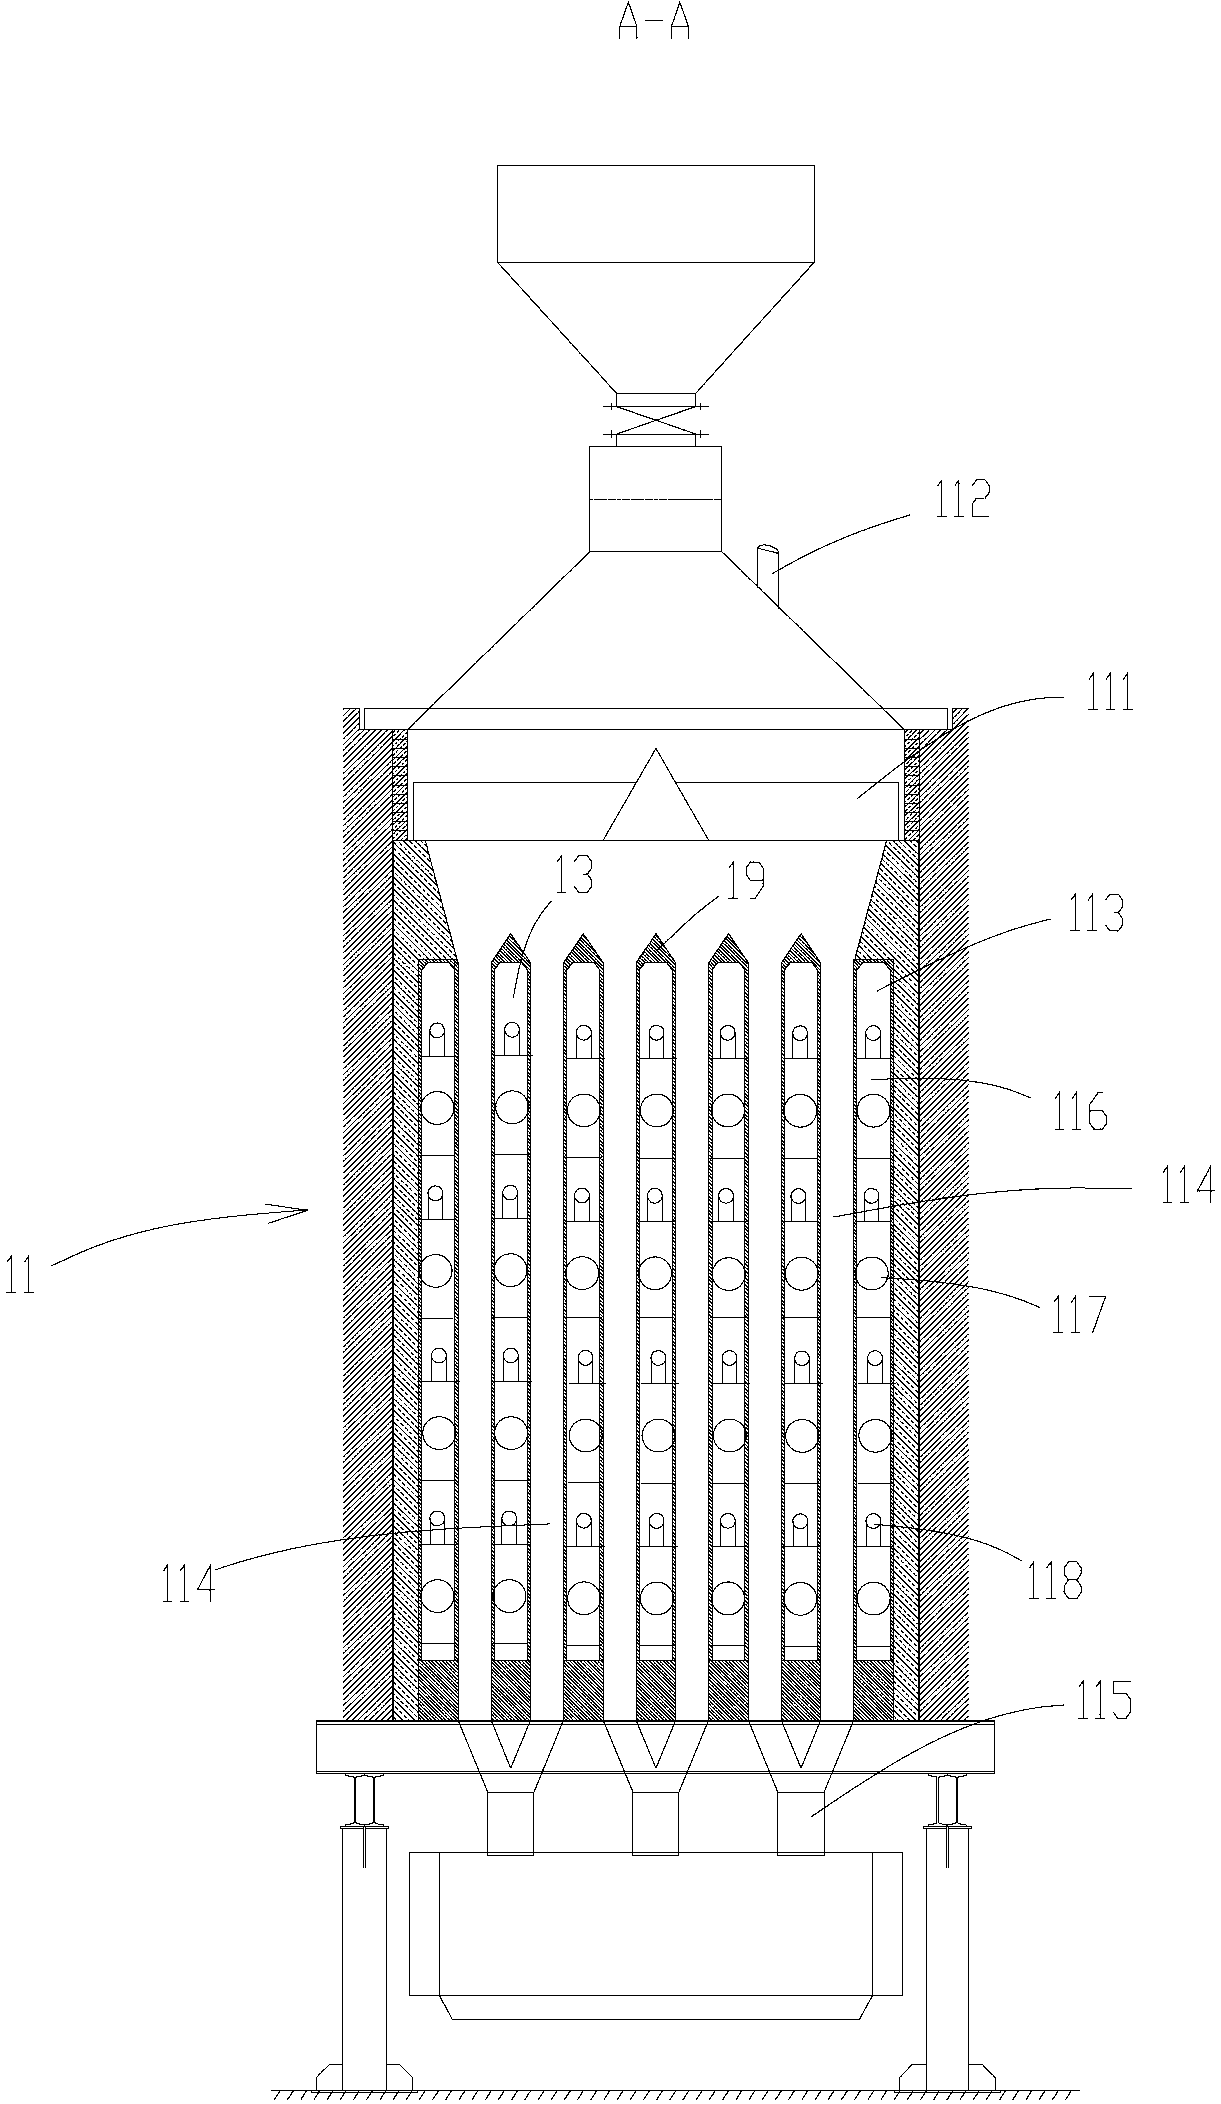 External heat radiation type dry distillation system for oil shale